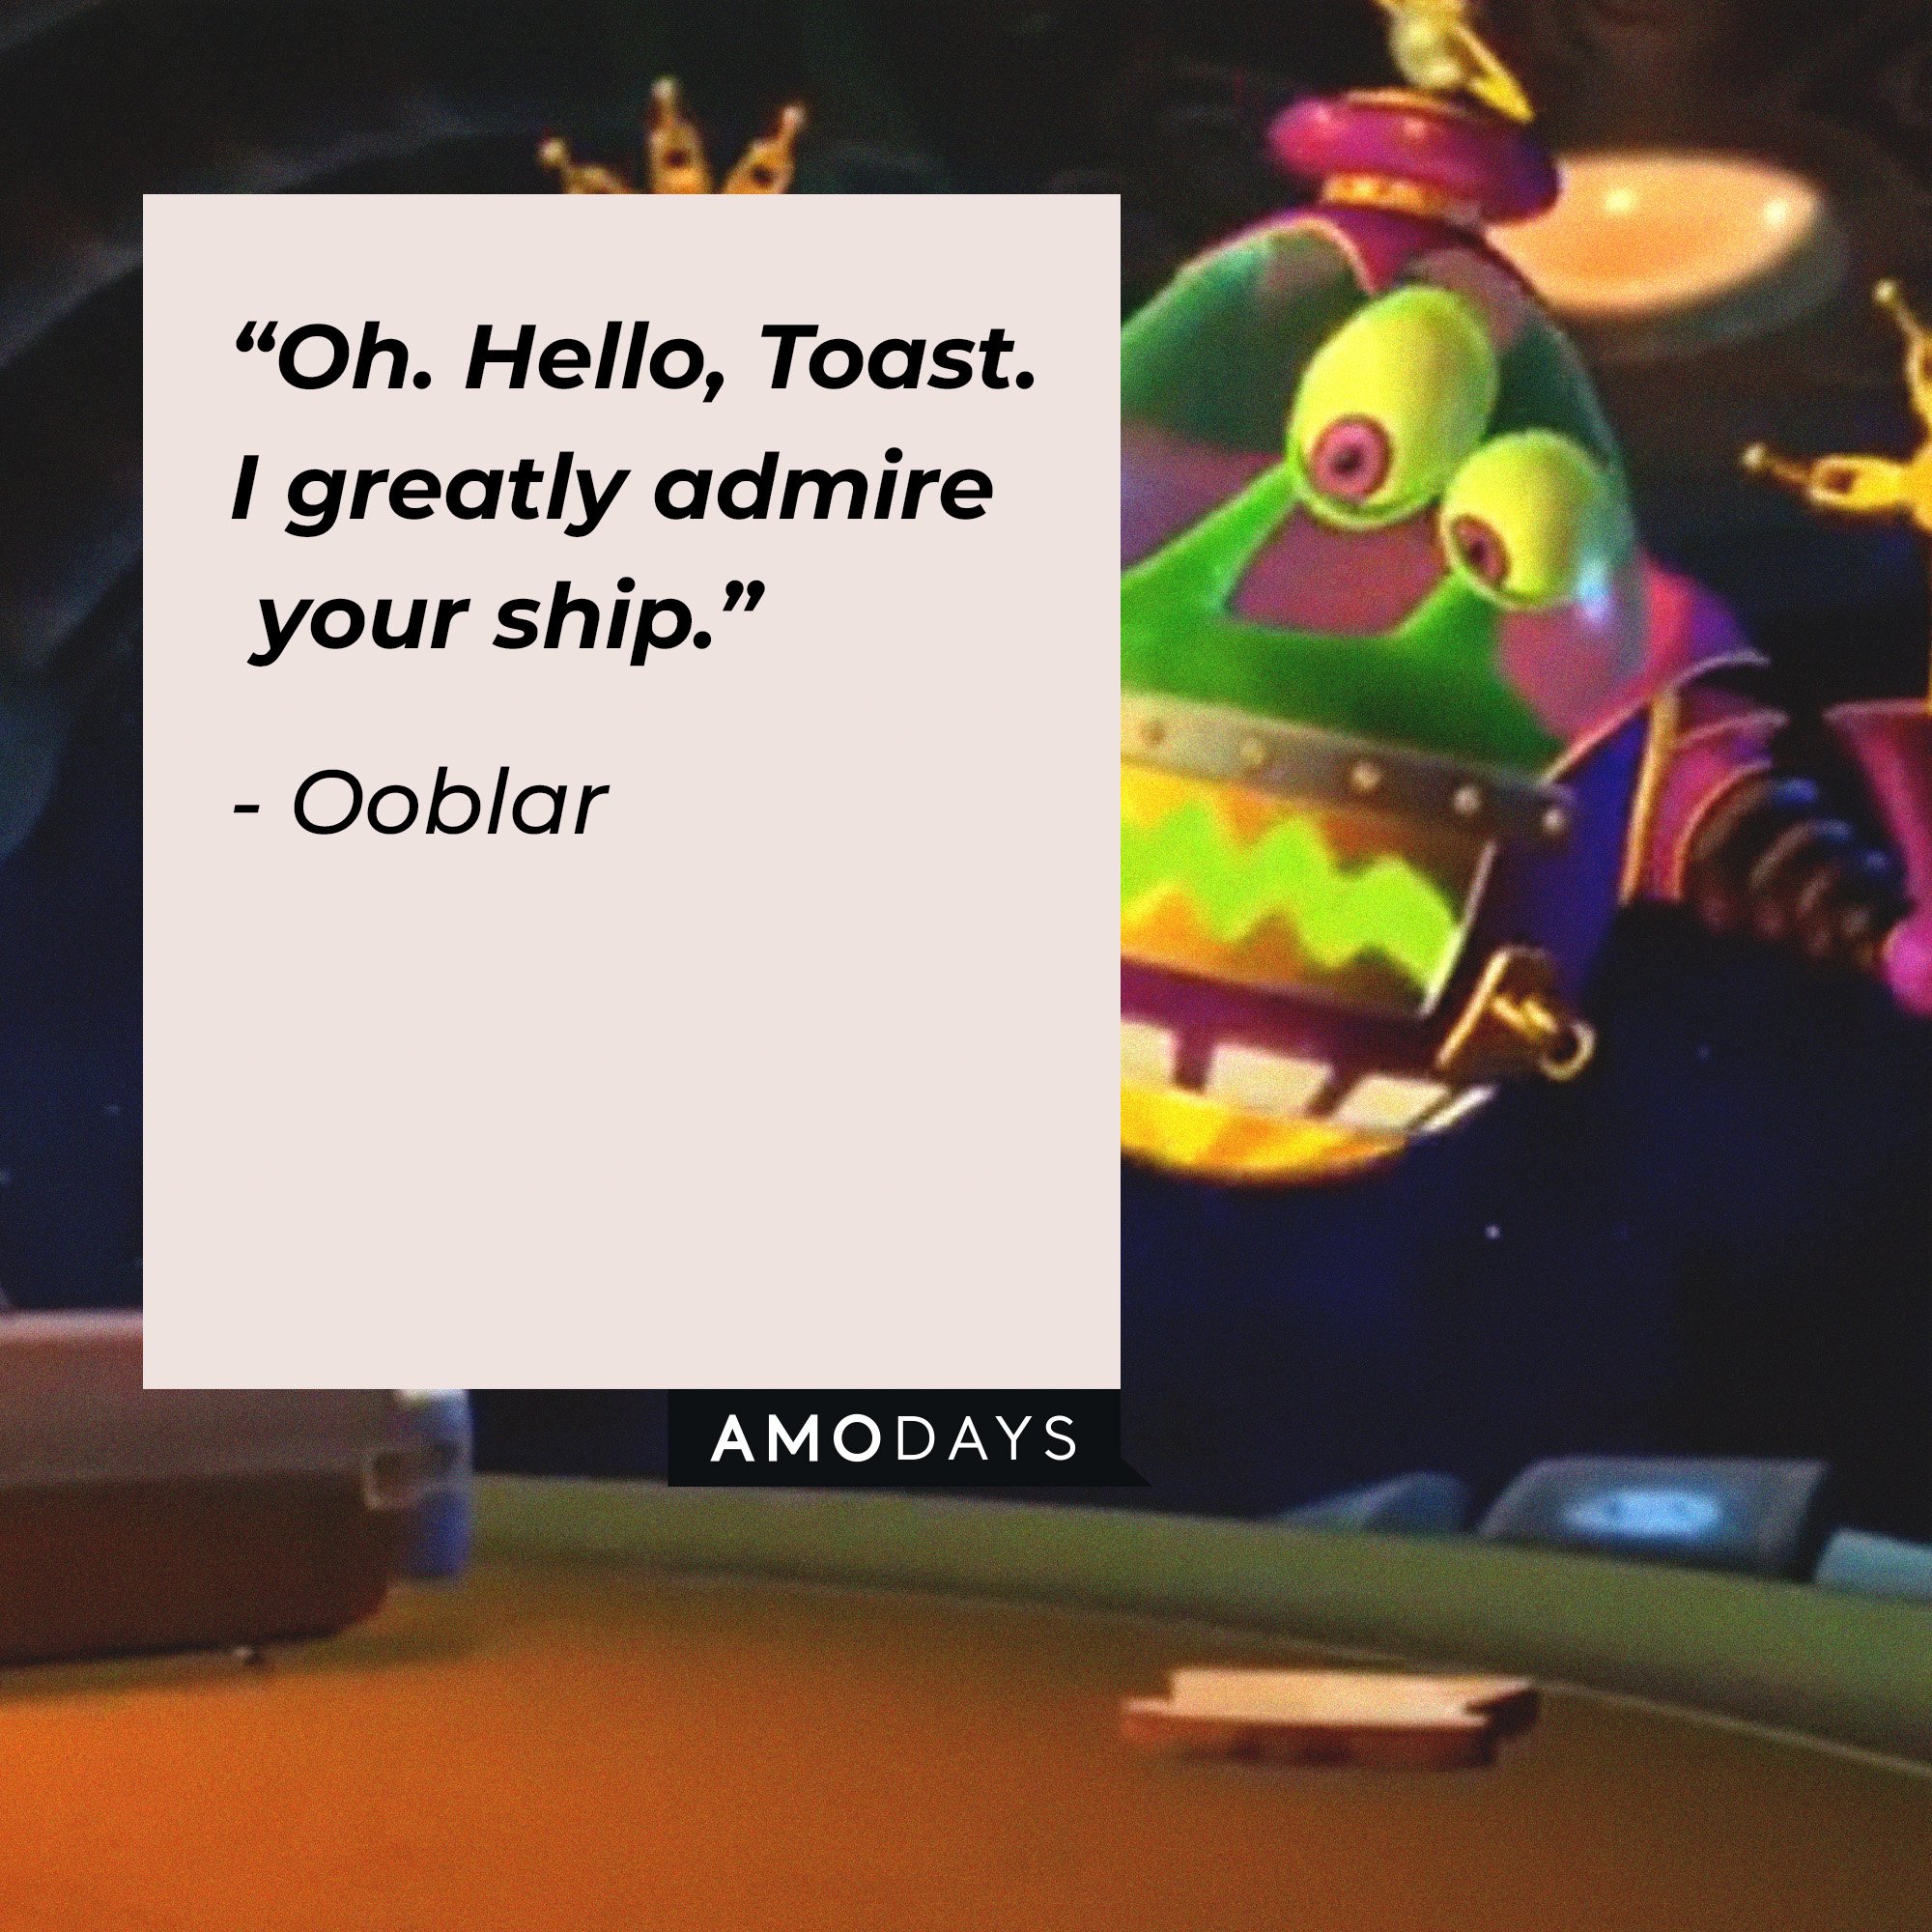 Ooblar’s quote: “Oh. Hello, Toast. I greatly admire your ship.” | Image: AmoDays